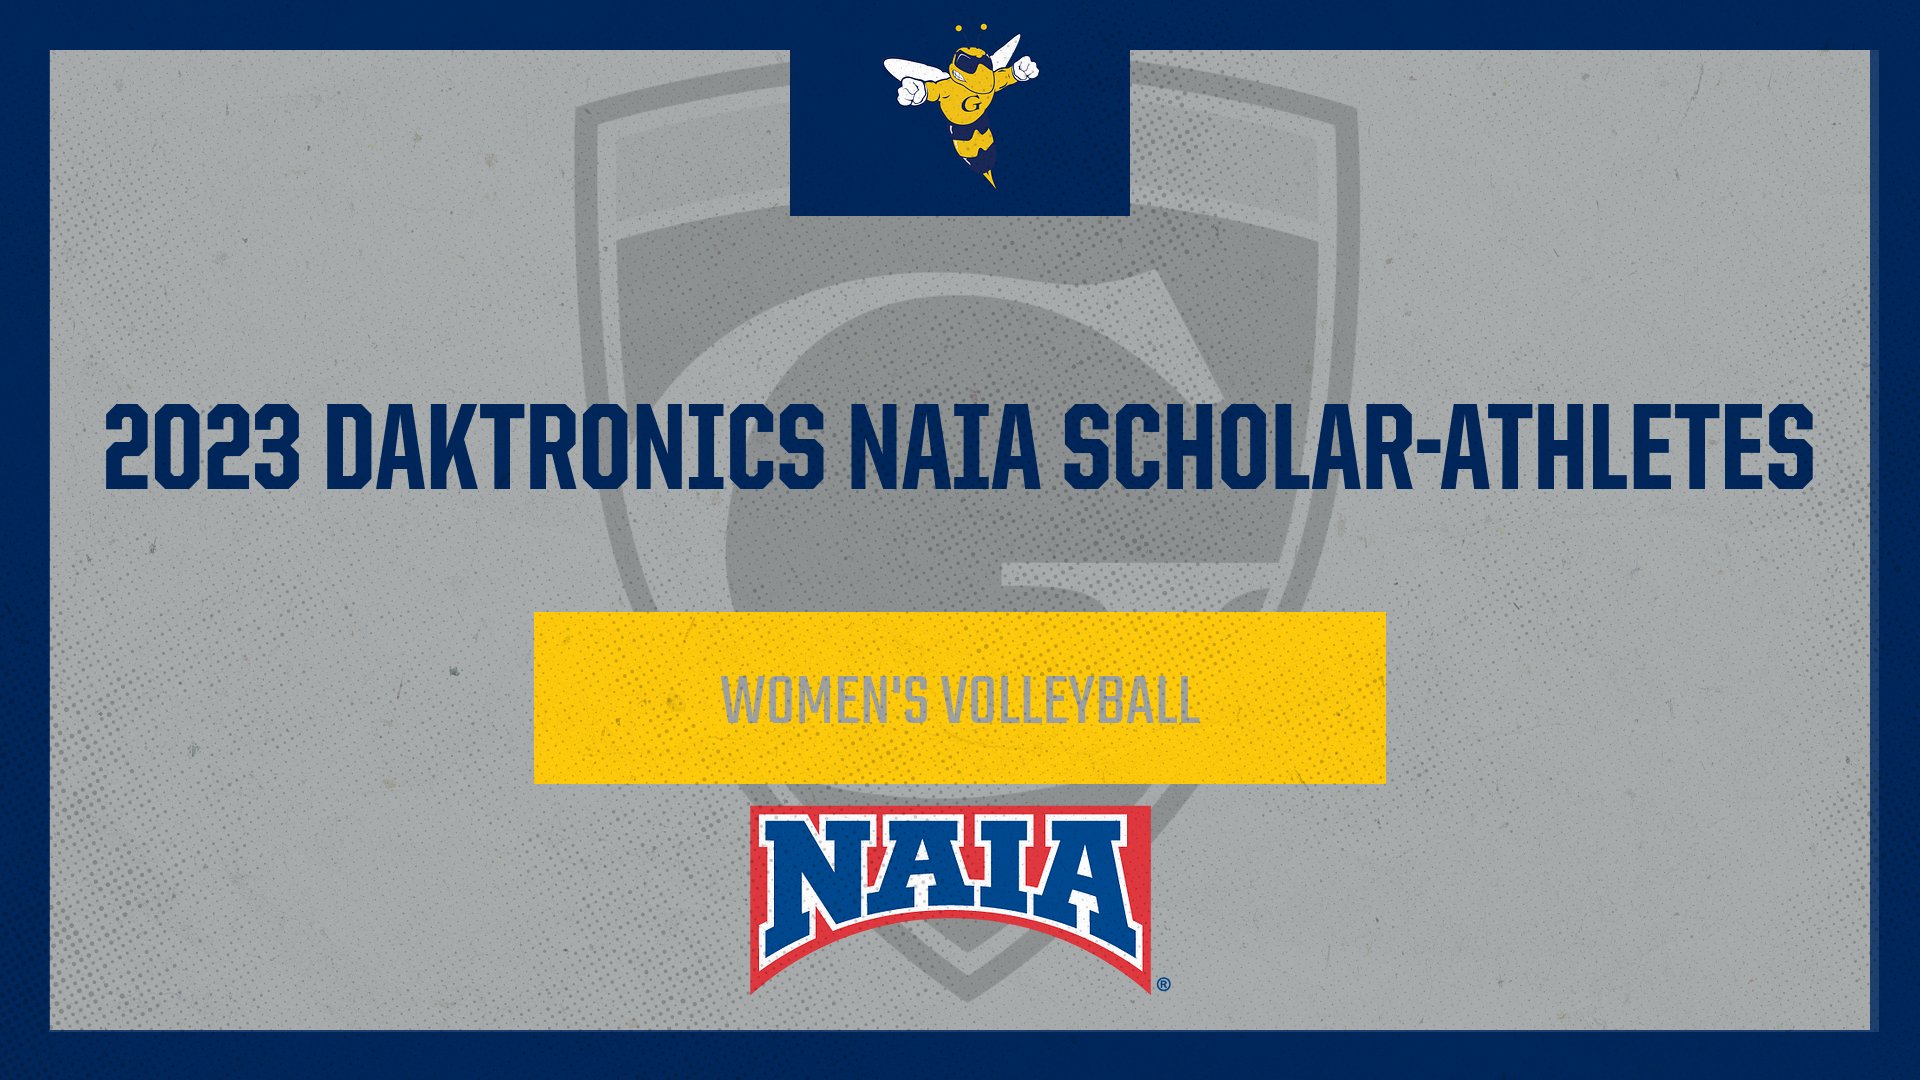 Women’s Volleyball Led the 2023 Daktronics NAIA Women’s Volleyball Scholar-Athlete with 20 Honorees